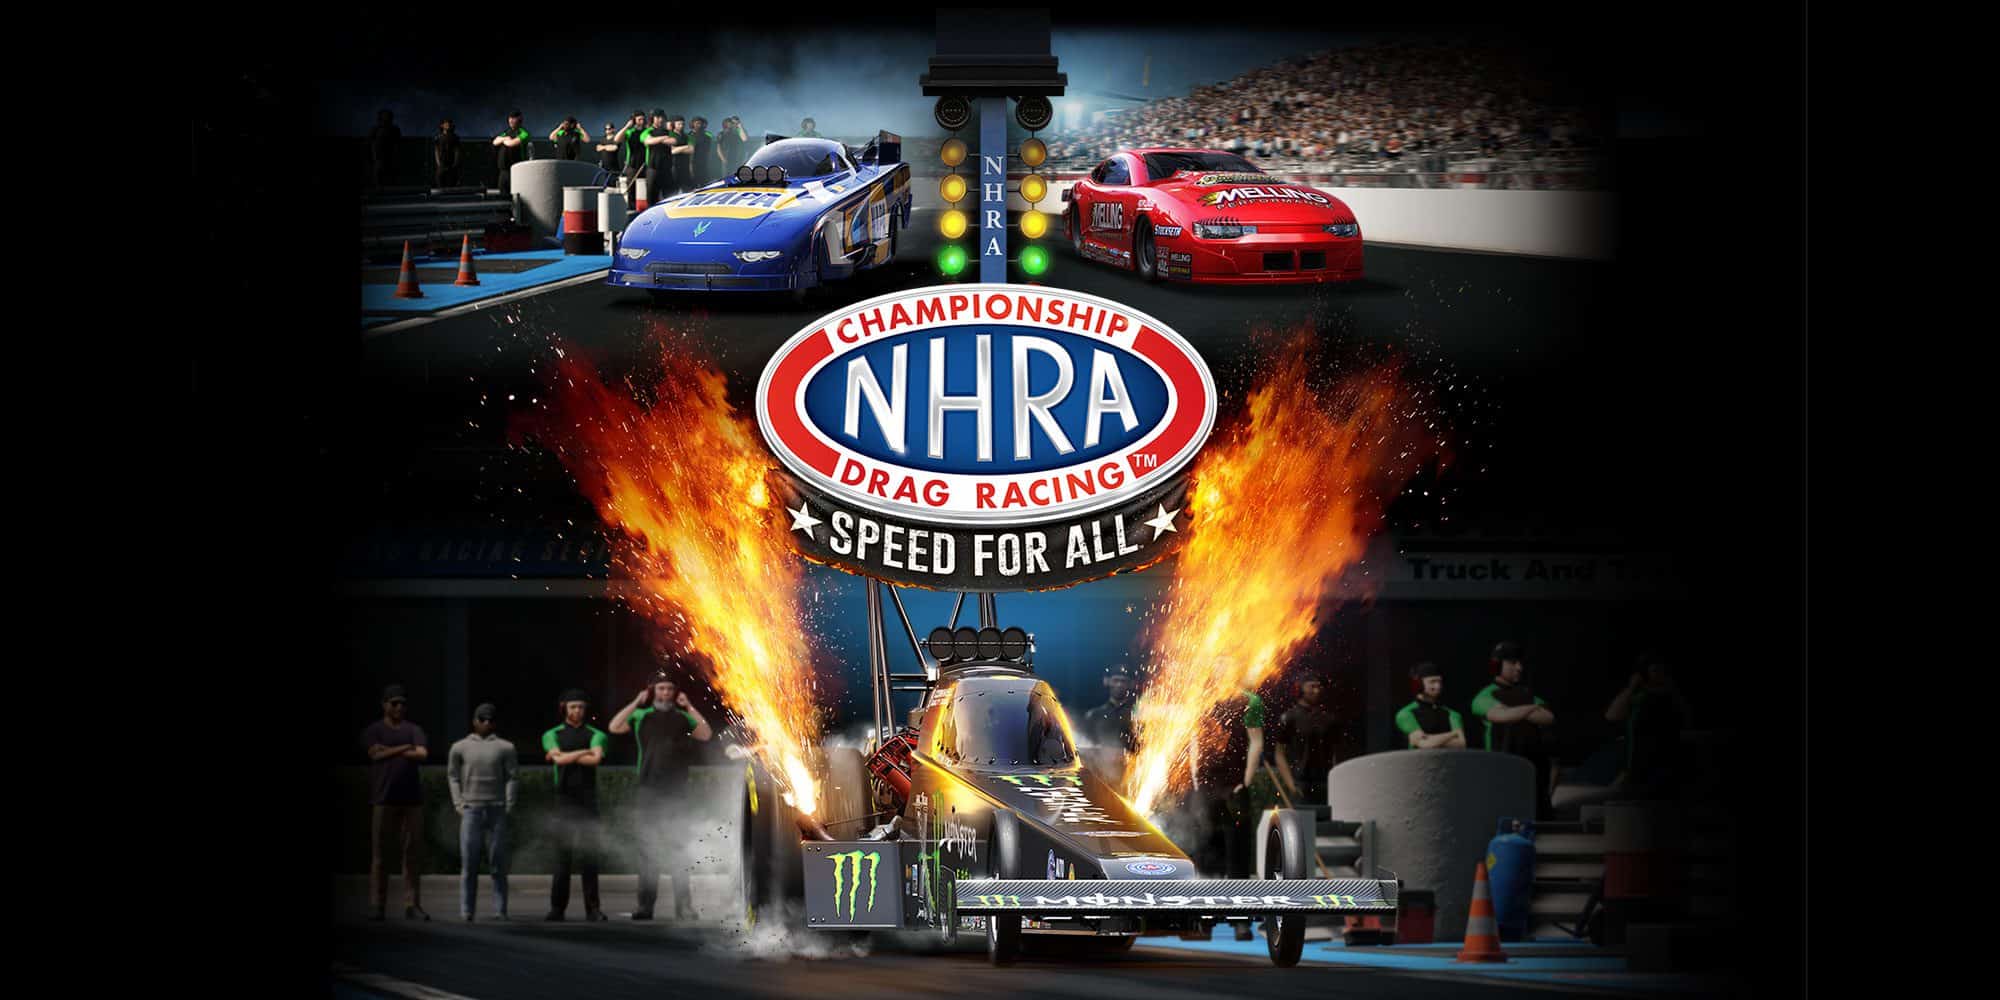 NHRA Championship Drag Racing: Speed for All game poster